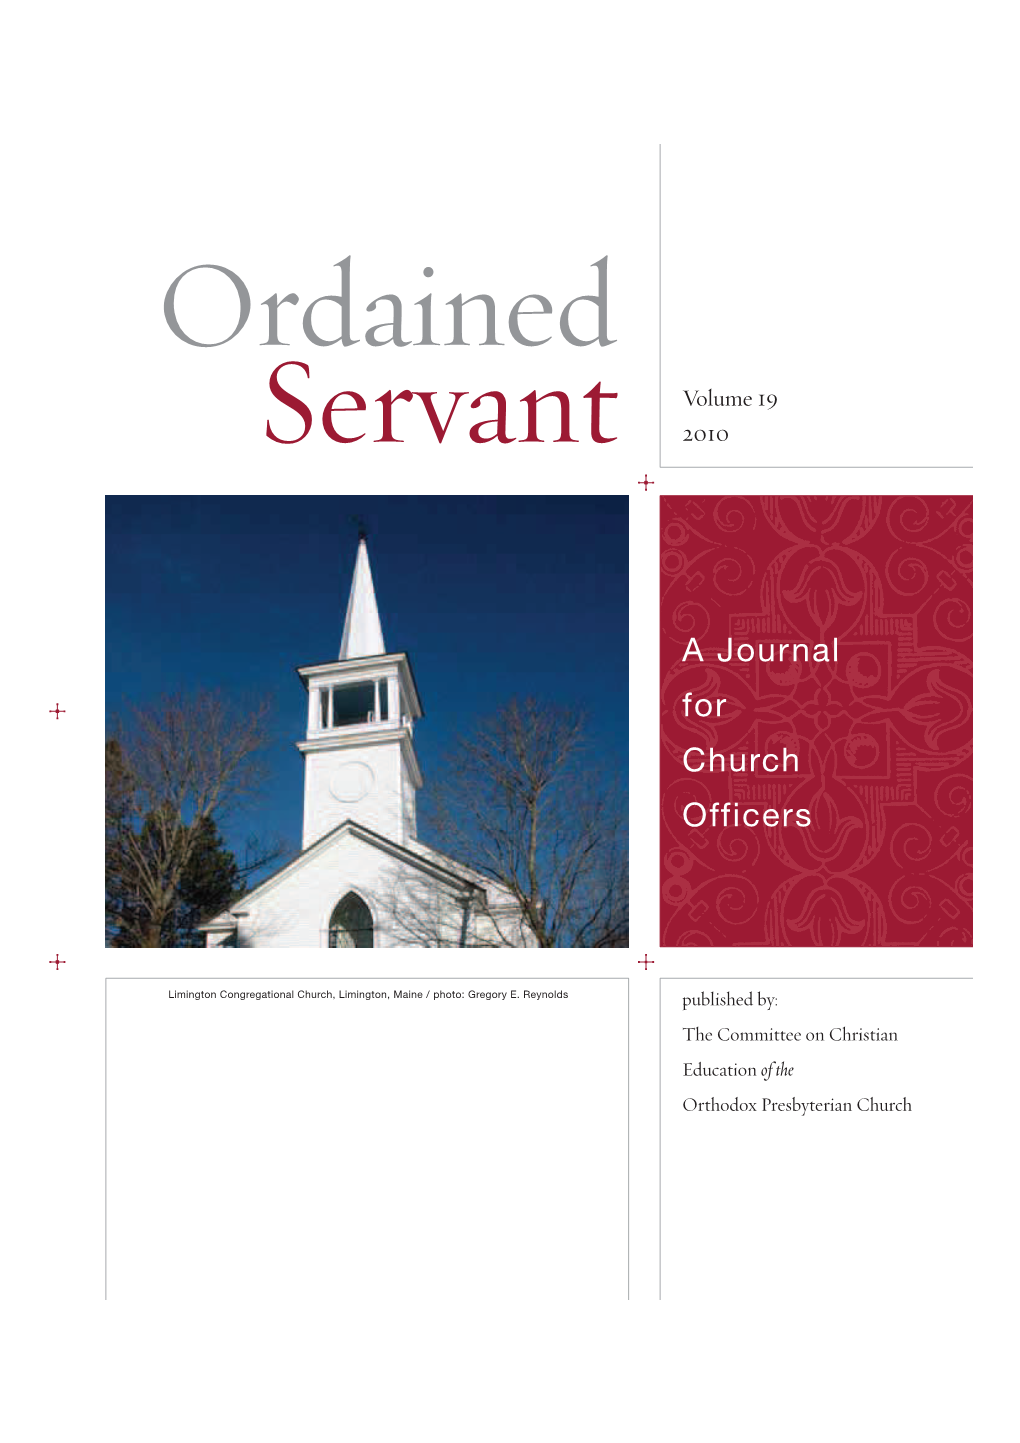 A Journal for Church Officers